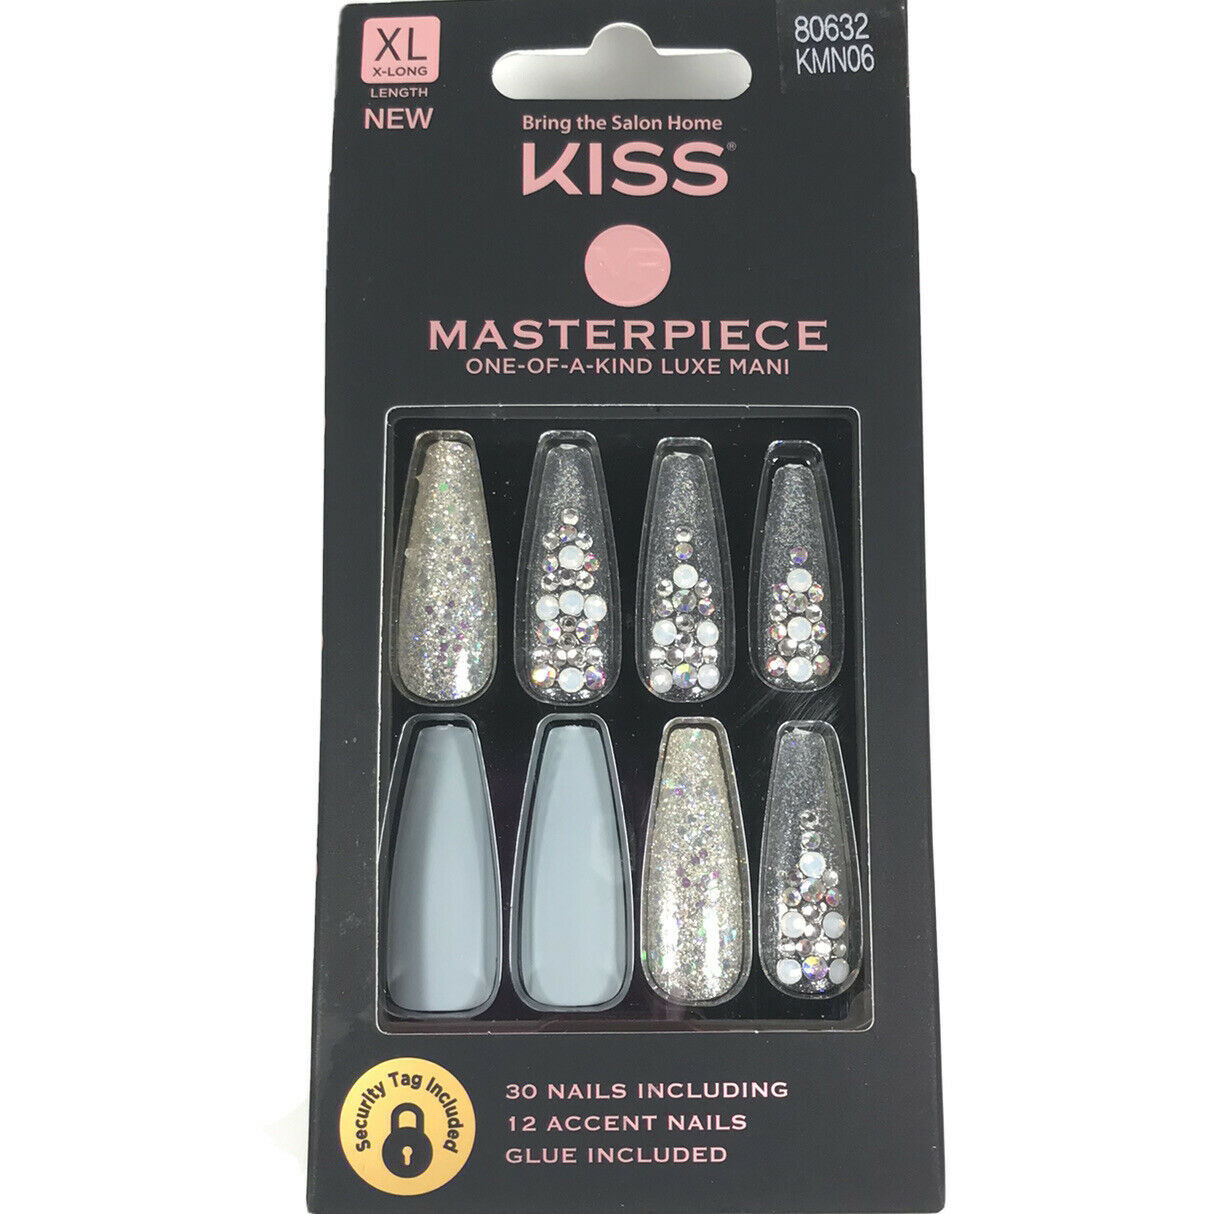 NEW Kiss Nails Masterpiece Luxe Glue Manicure XL Gel Coffin Blue Silver ...